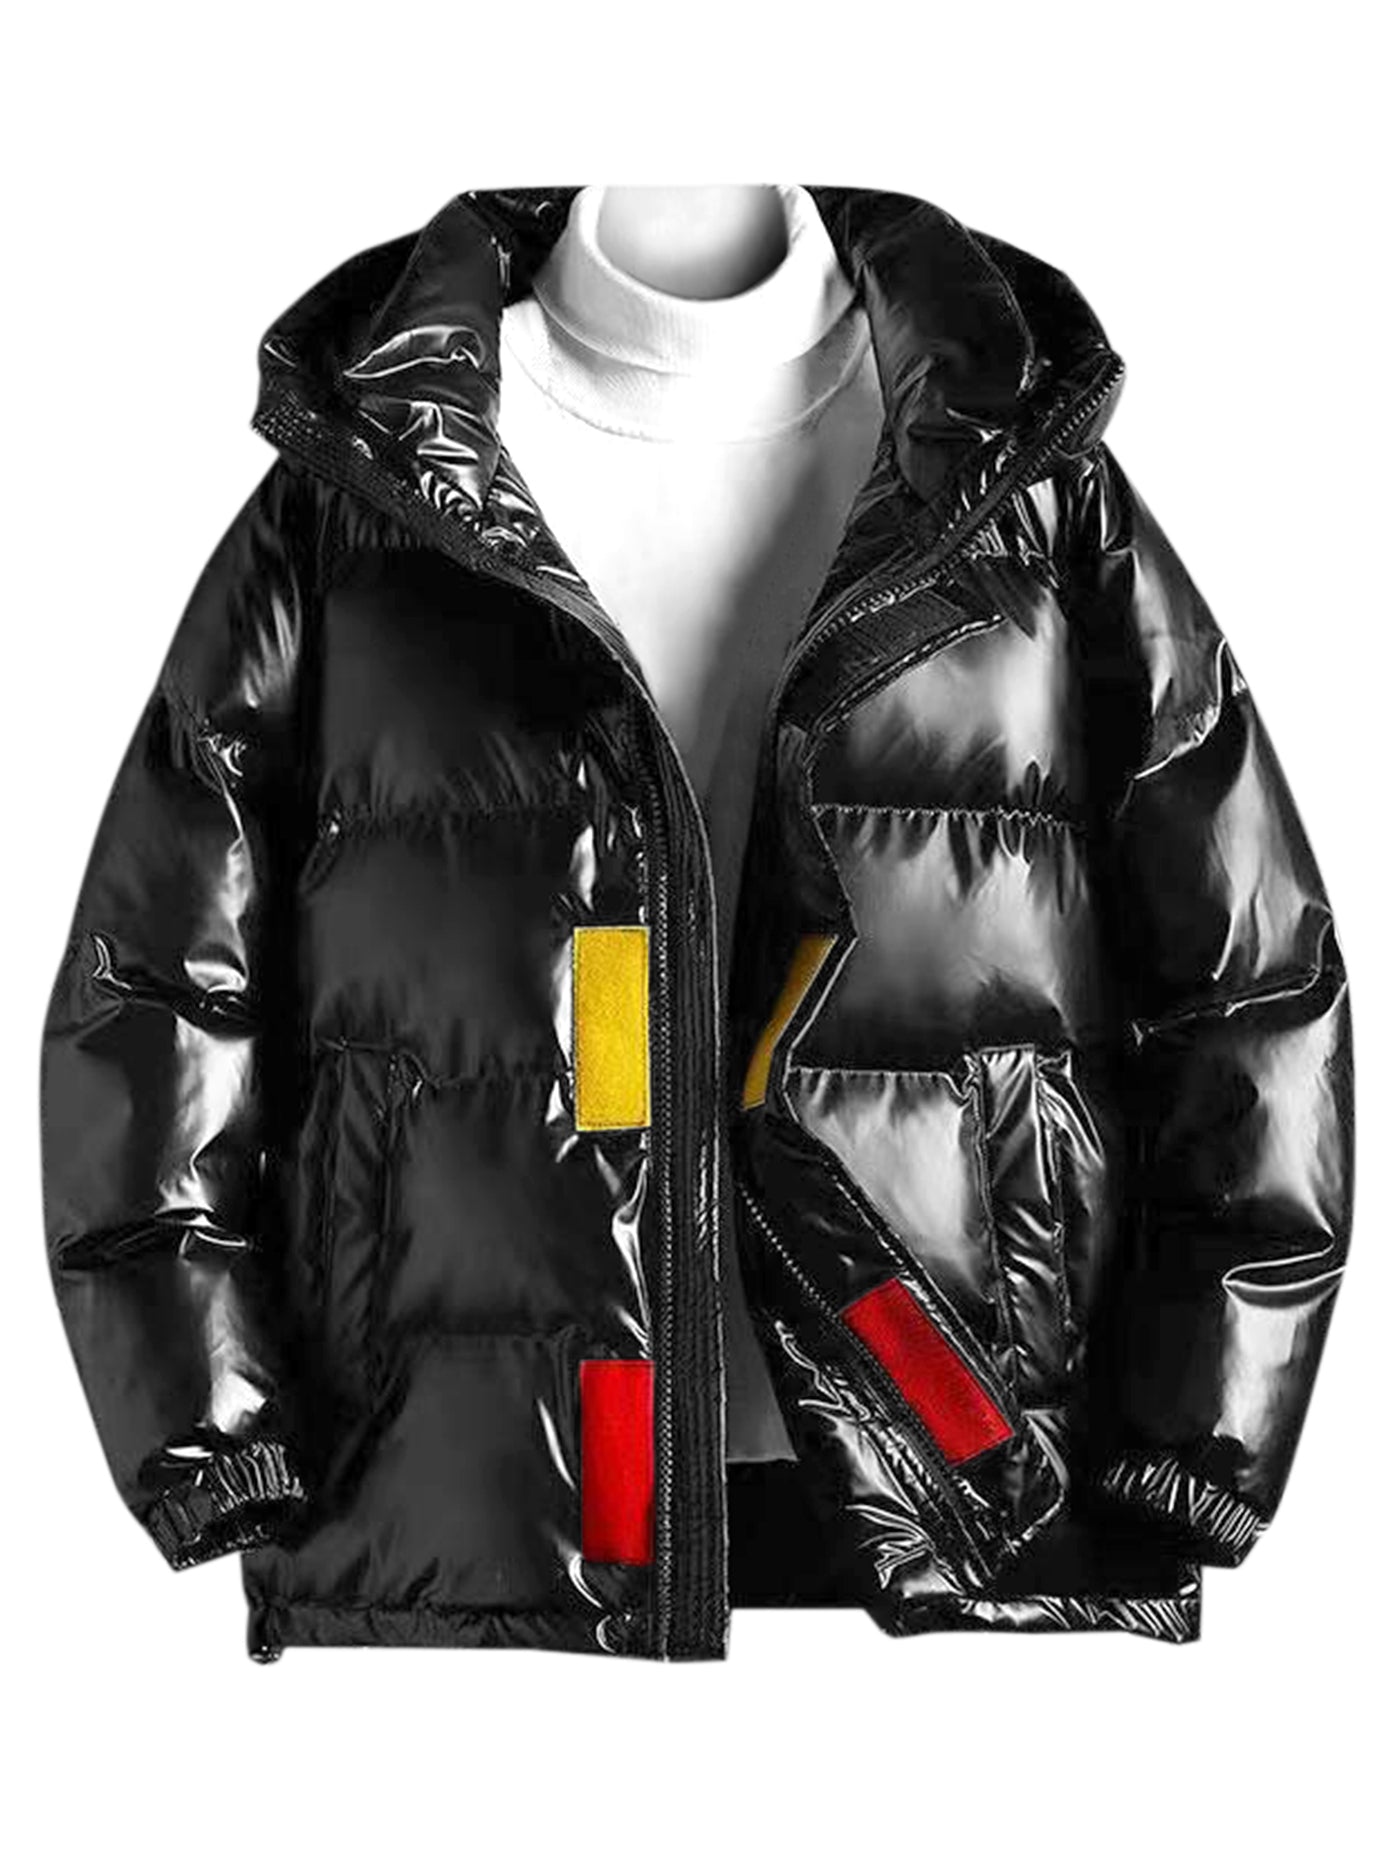 Bublédon Metallic Puffer Jacket for Men's Hooded Long Sleeves Full Zip Shiny Quilted Jackets